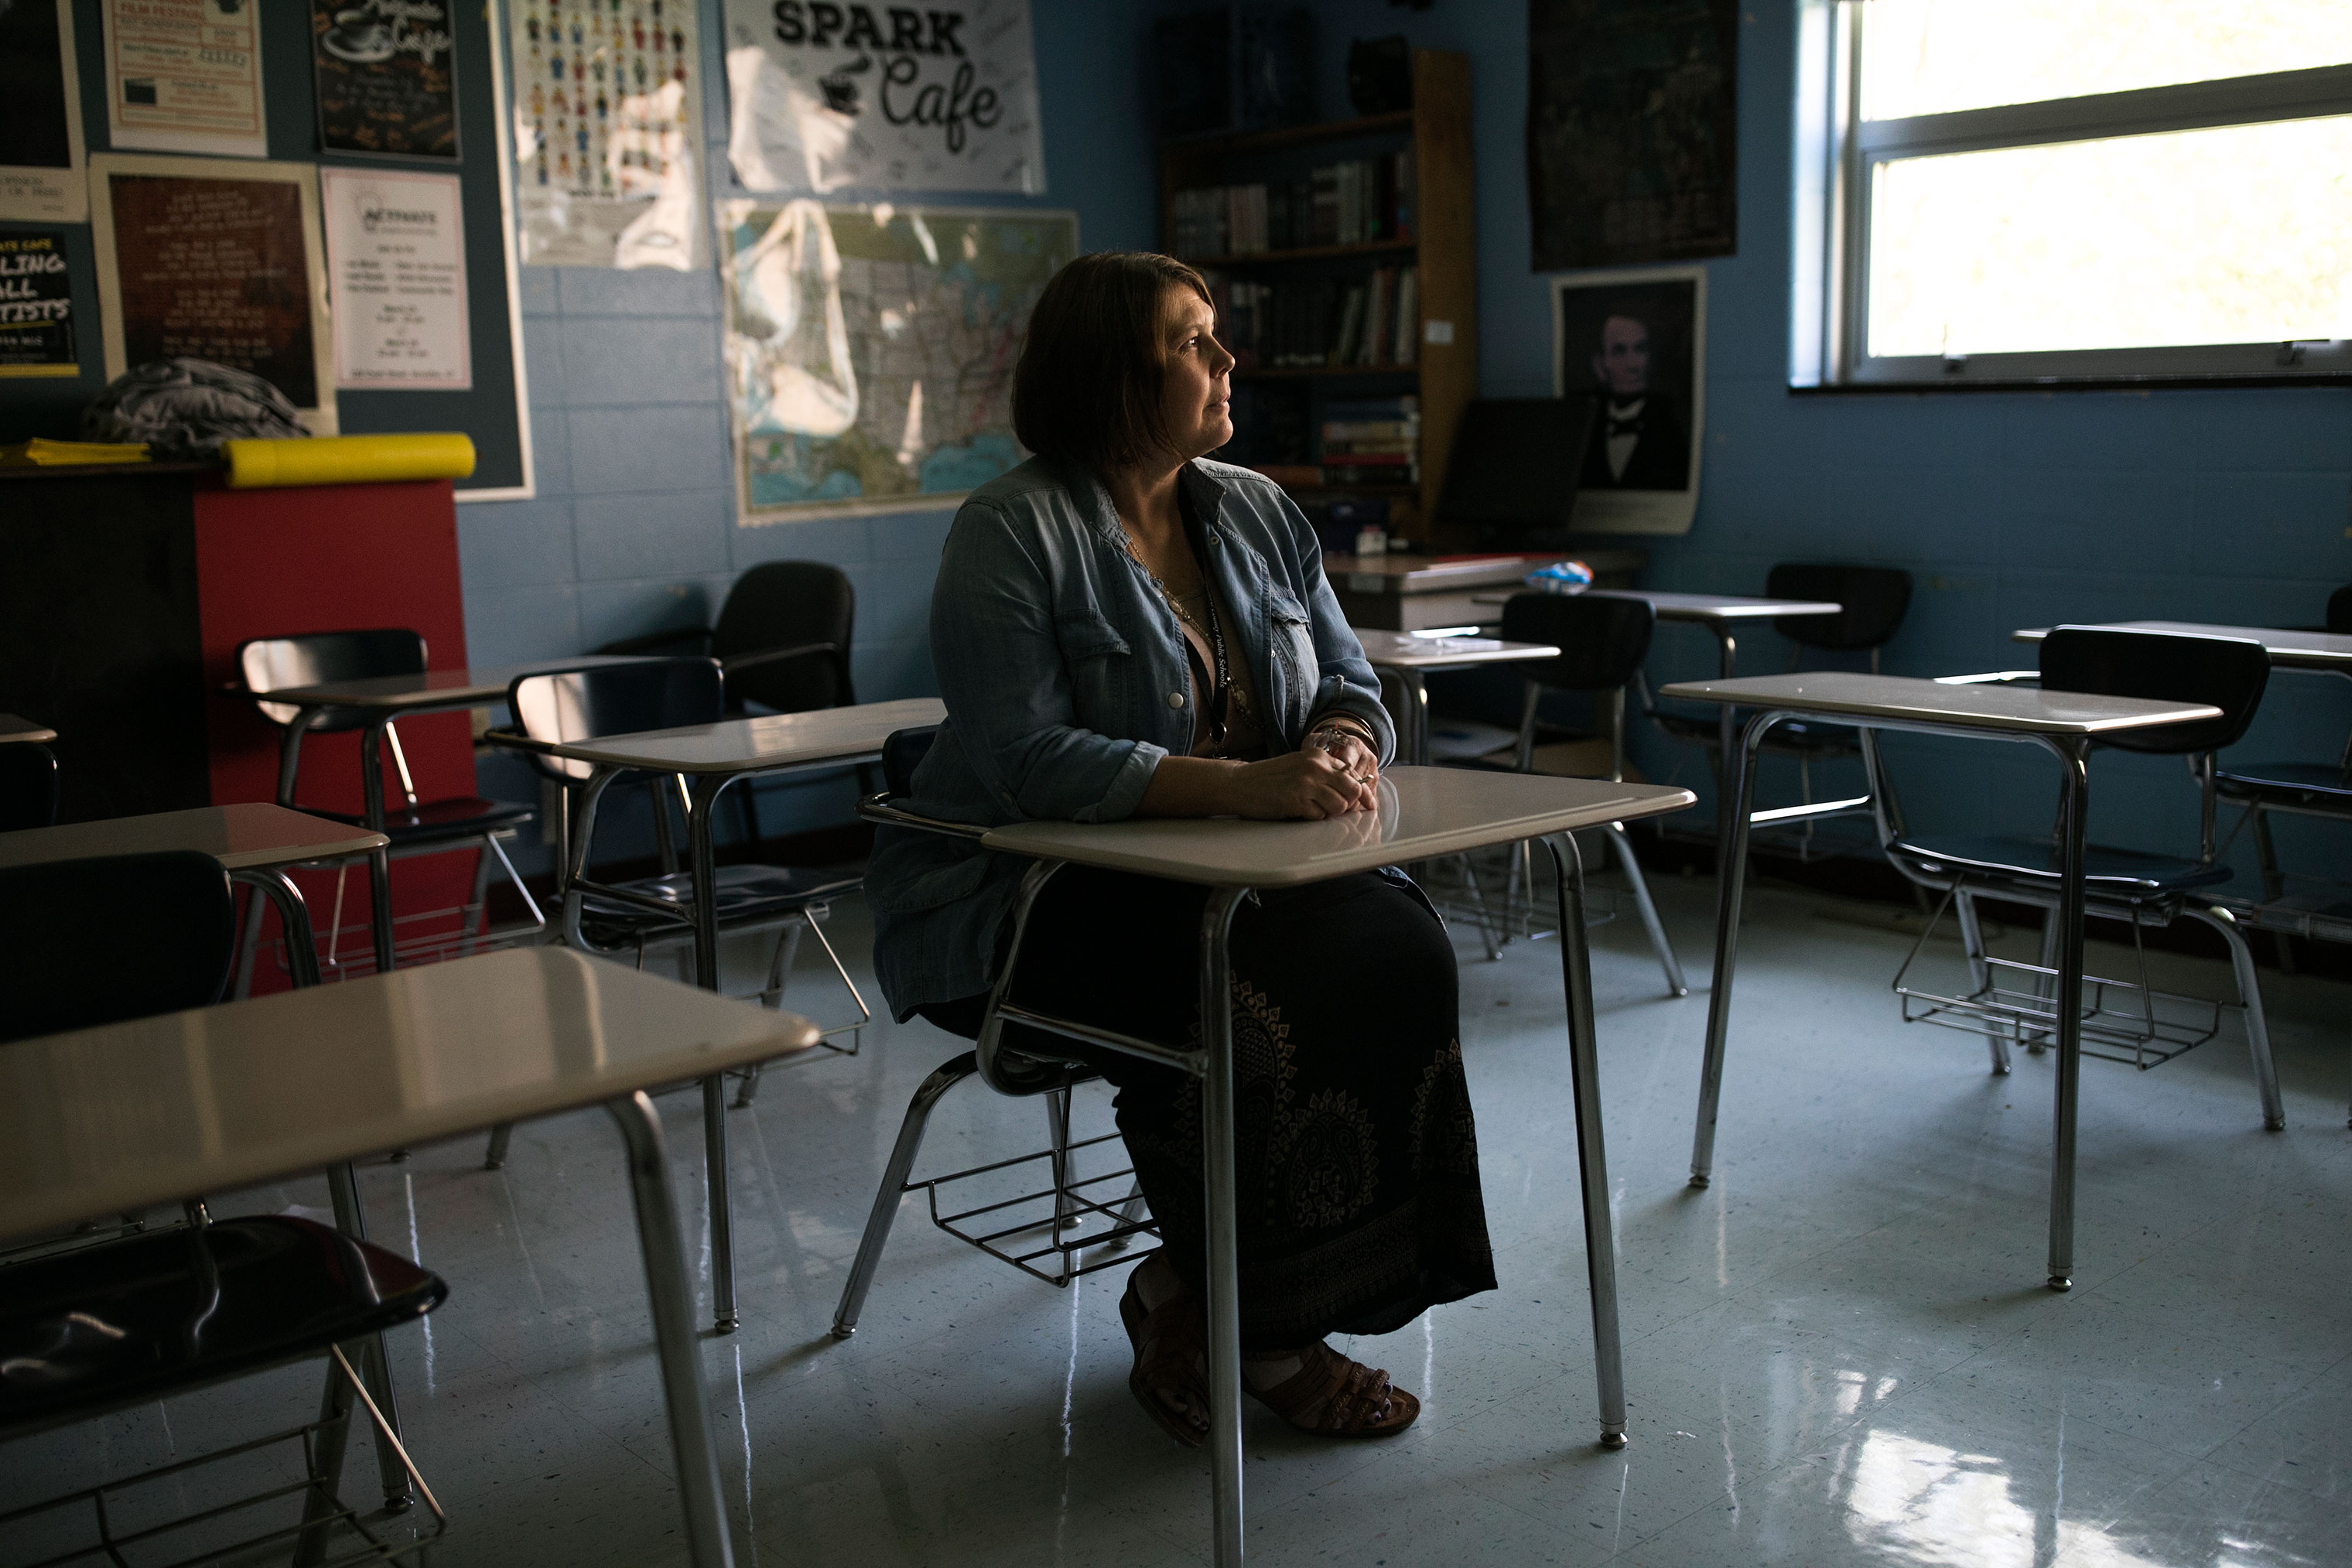 U.S. history teacher Hope Brown sits in a classroom at Woodford County High School in Versailles, Ky., on Aug. 31, 2018. (Maddie McGarvey for TIME/Economic Hardship Reporting Project)